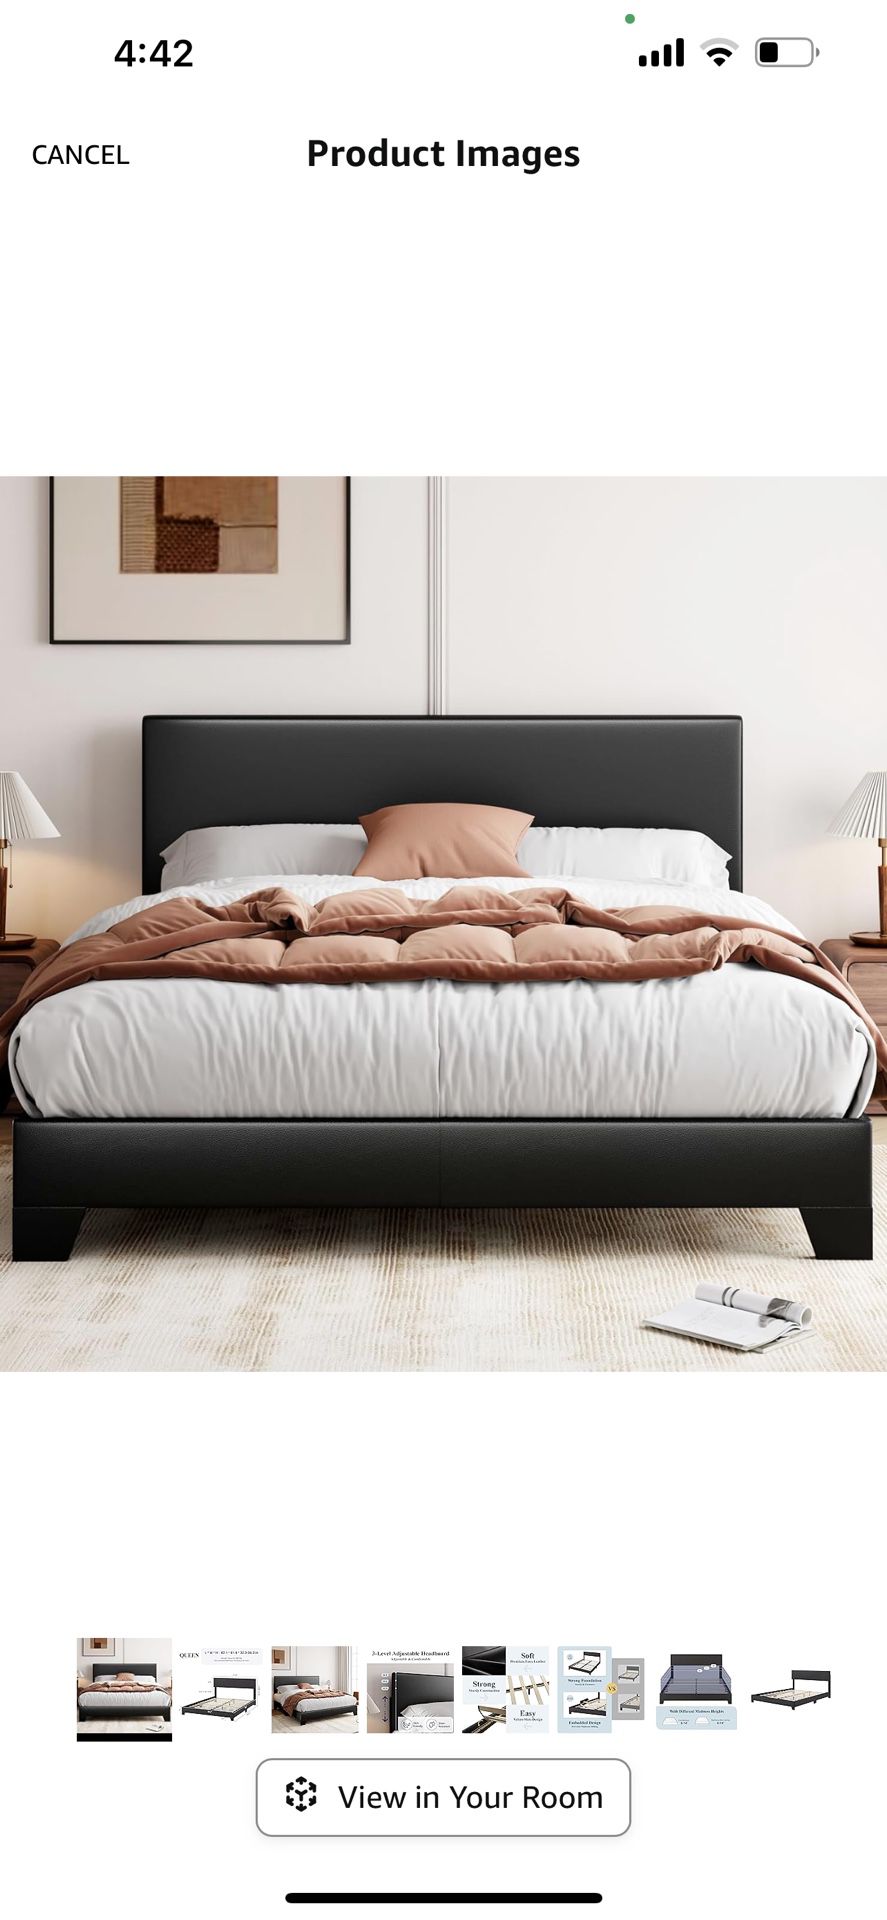 New in box Queen Bed Frame with Adjustable Headboard, Faux Leather Platform Bed with Wood Slats, Heavy Duty Mattress Foundation, No Box Spring Needed,